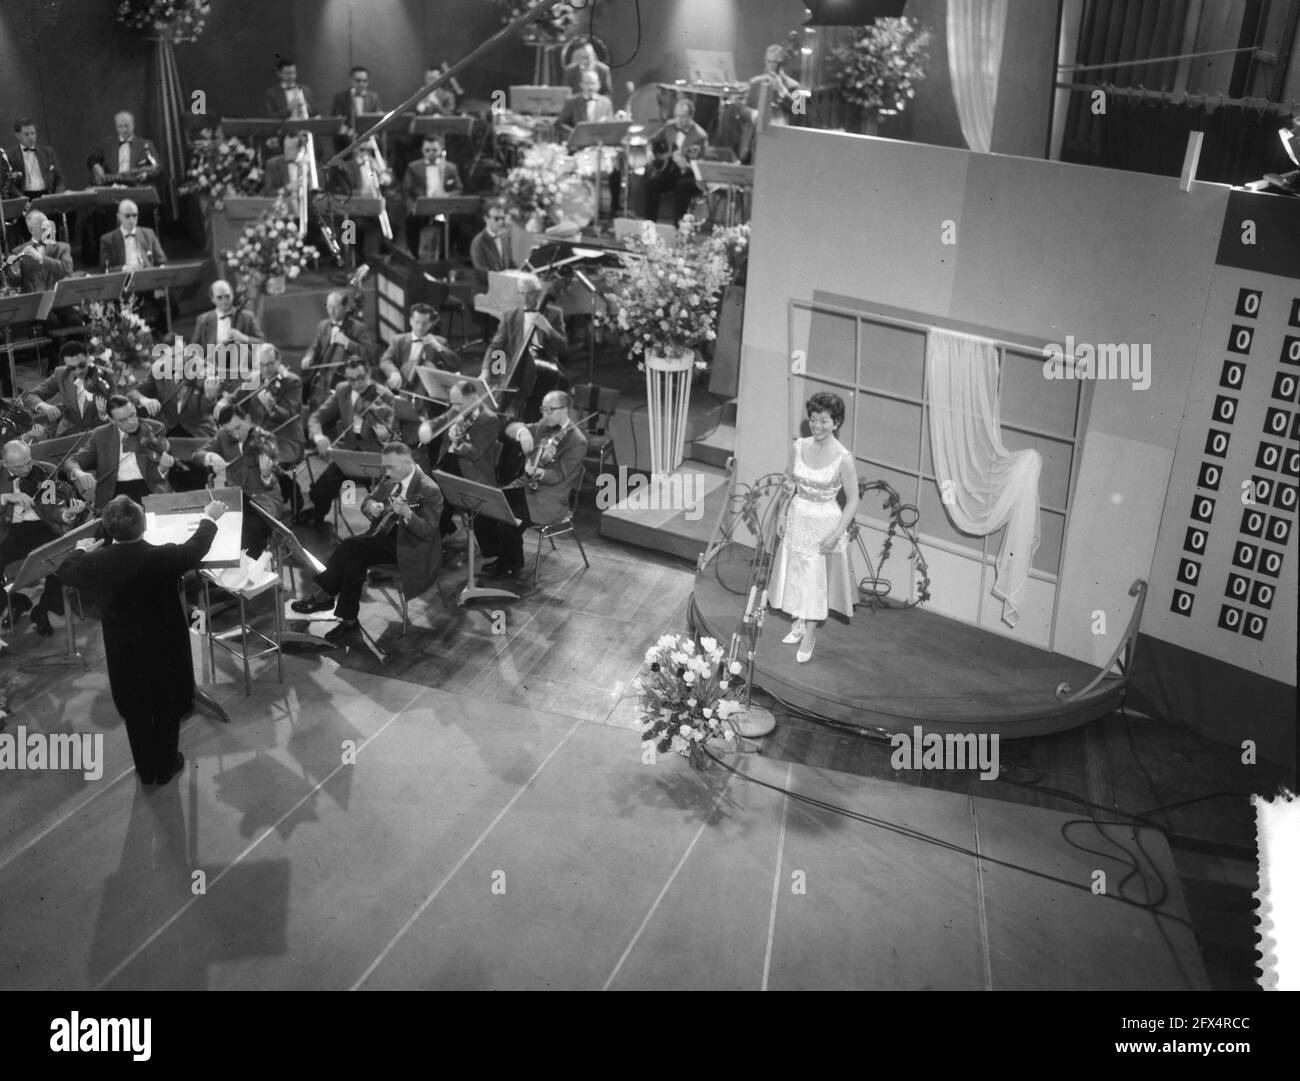 Eurovision Song Contest. Lys Assia (Switzerland), March 11, 1958, song festivals, singers, The Netherlands, 20th century press agency photo, news to remember, documentary, historic photography 1945-1990, visual stories, human history of the Twentieth Century, capturing moments in time Stock Photo